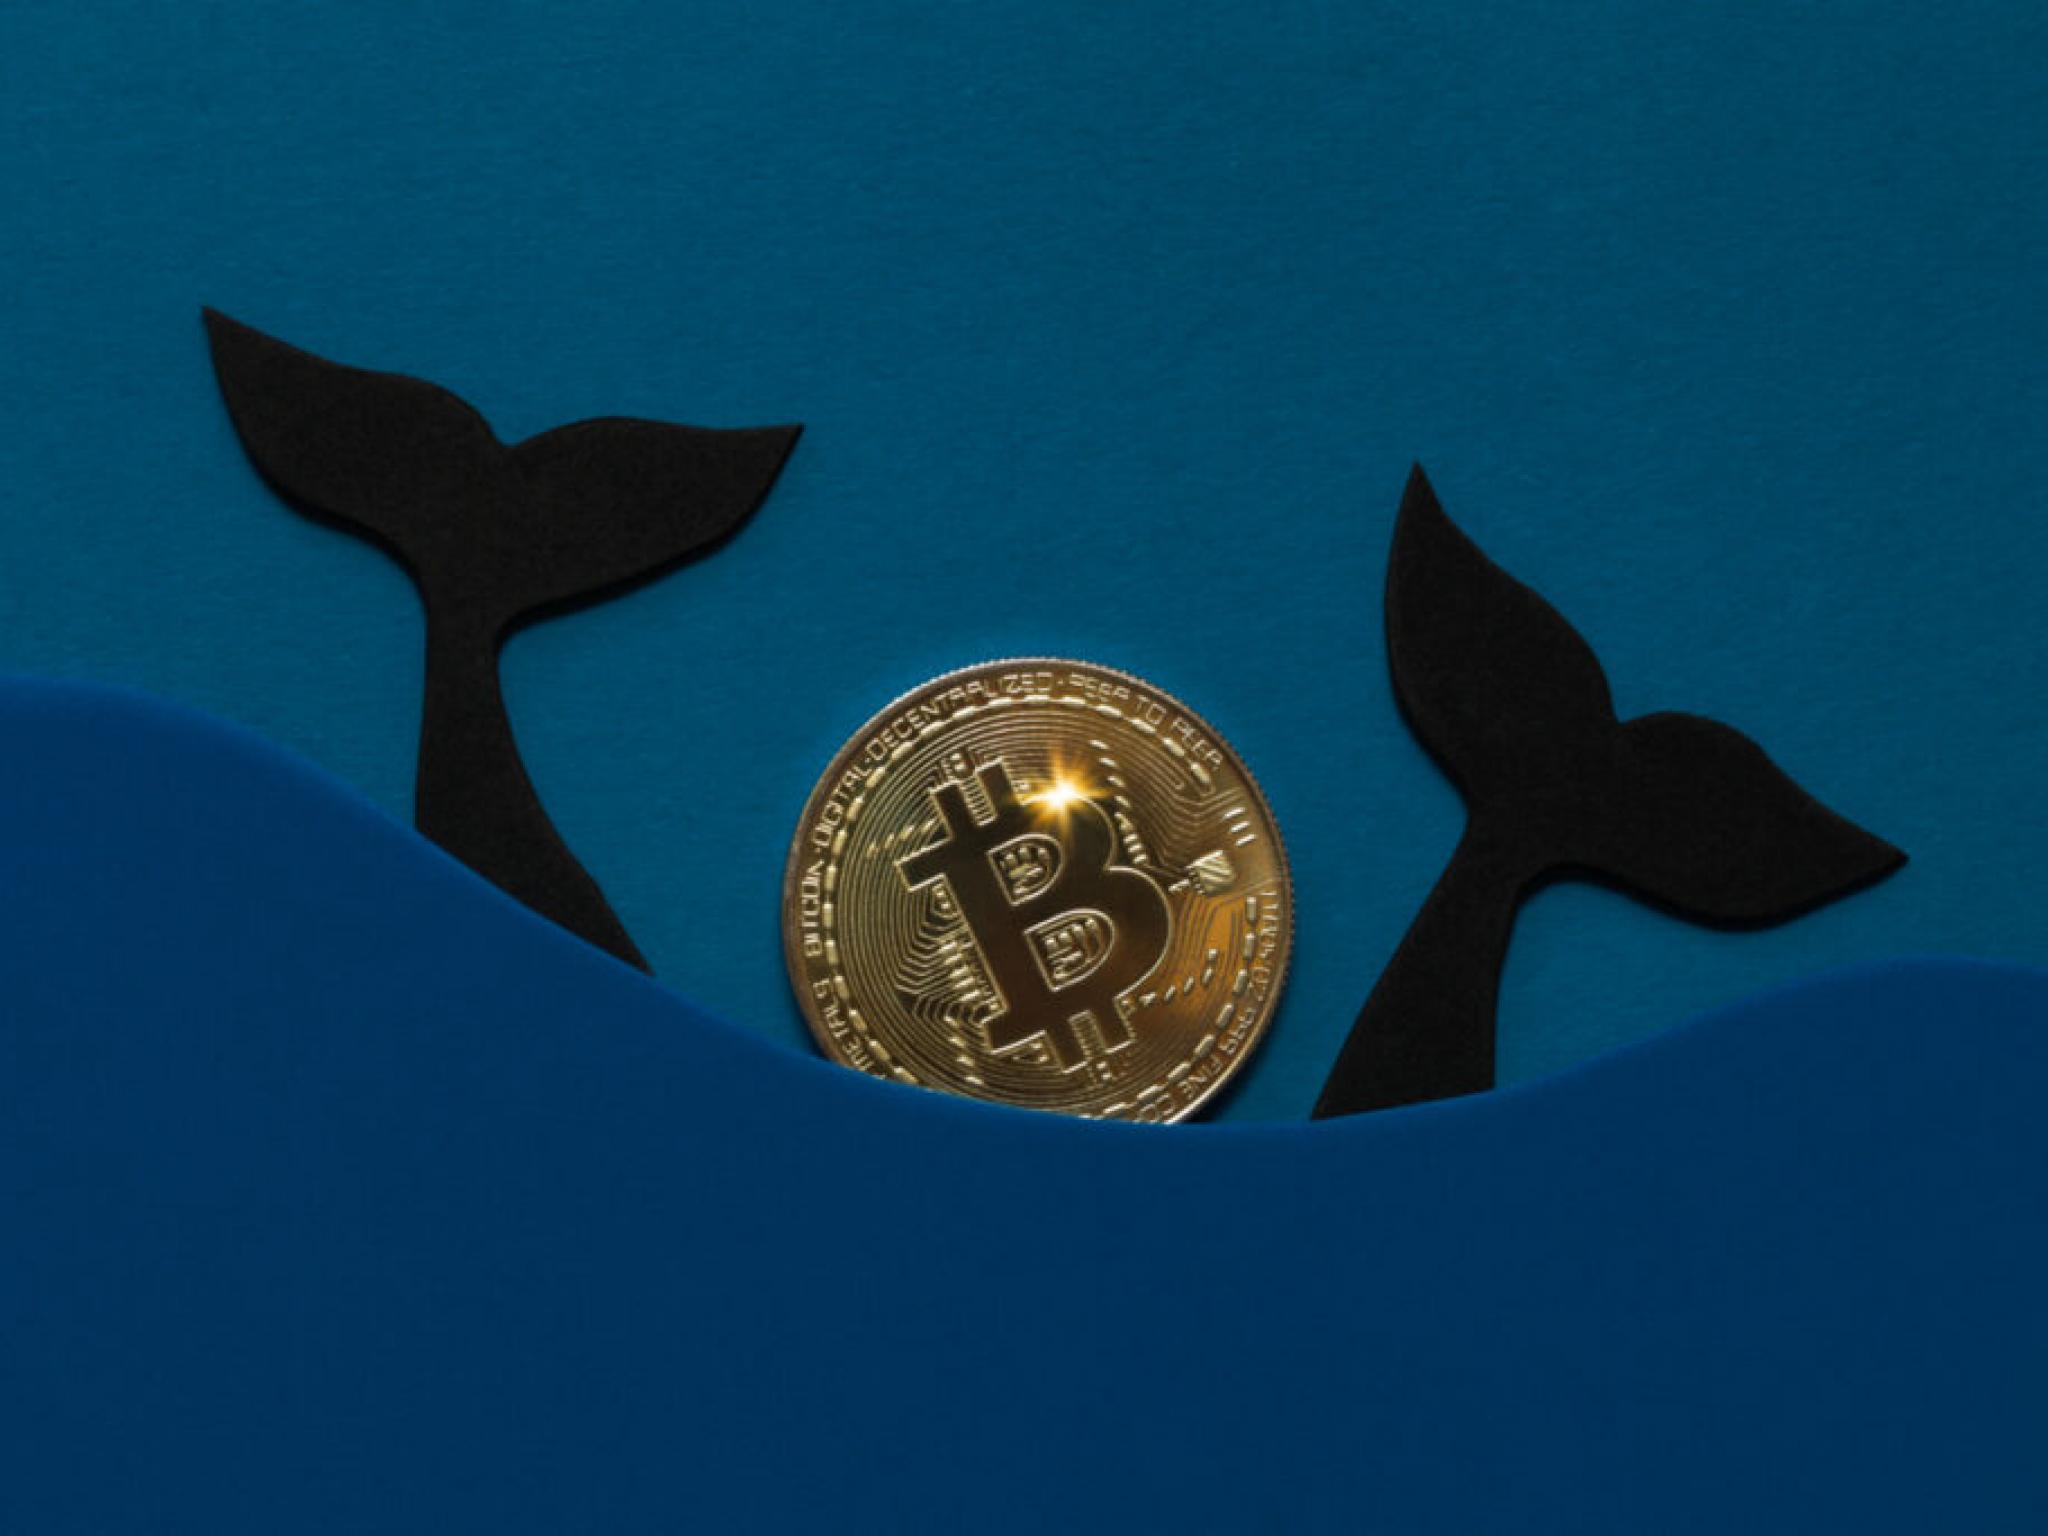  bitcoin-whale-makes-395m-purchase-heres-how-their-last-trade-went 